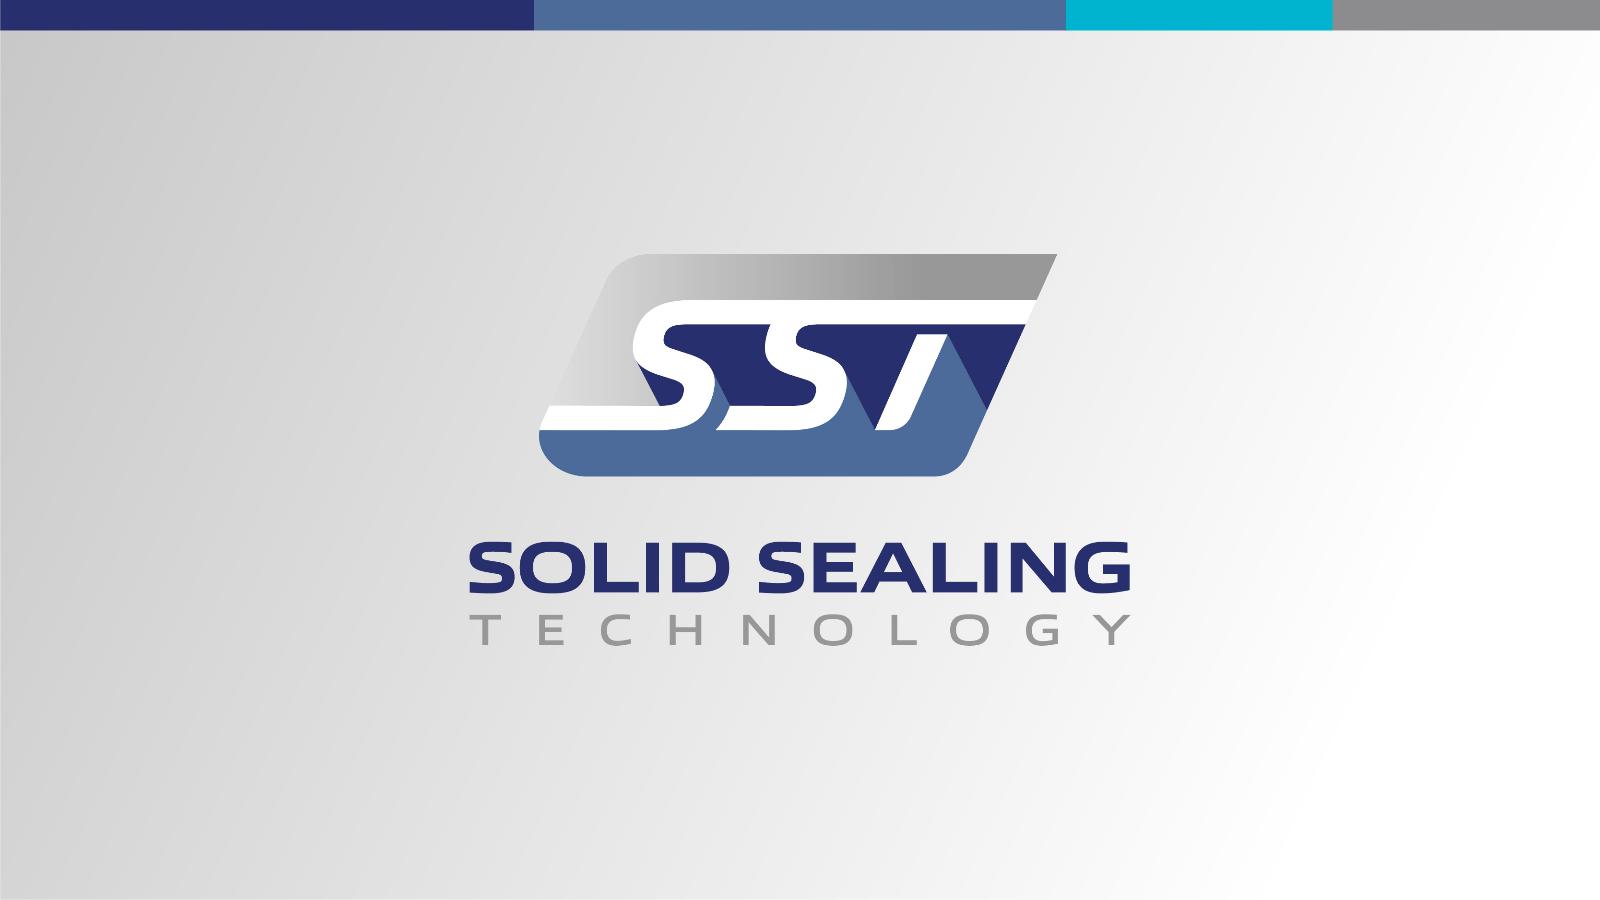 Solid Sealing Technology | Logos and color paletter